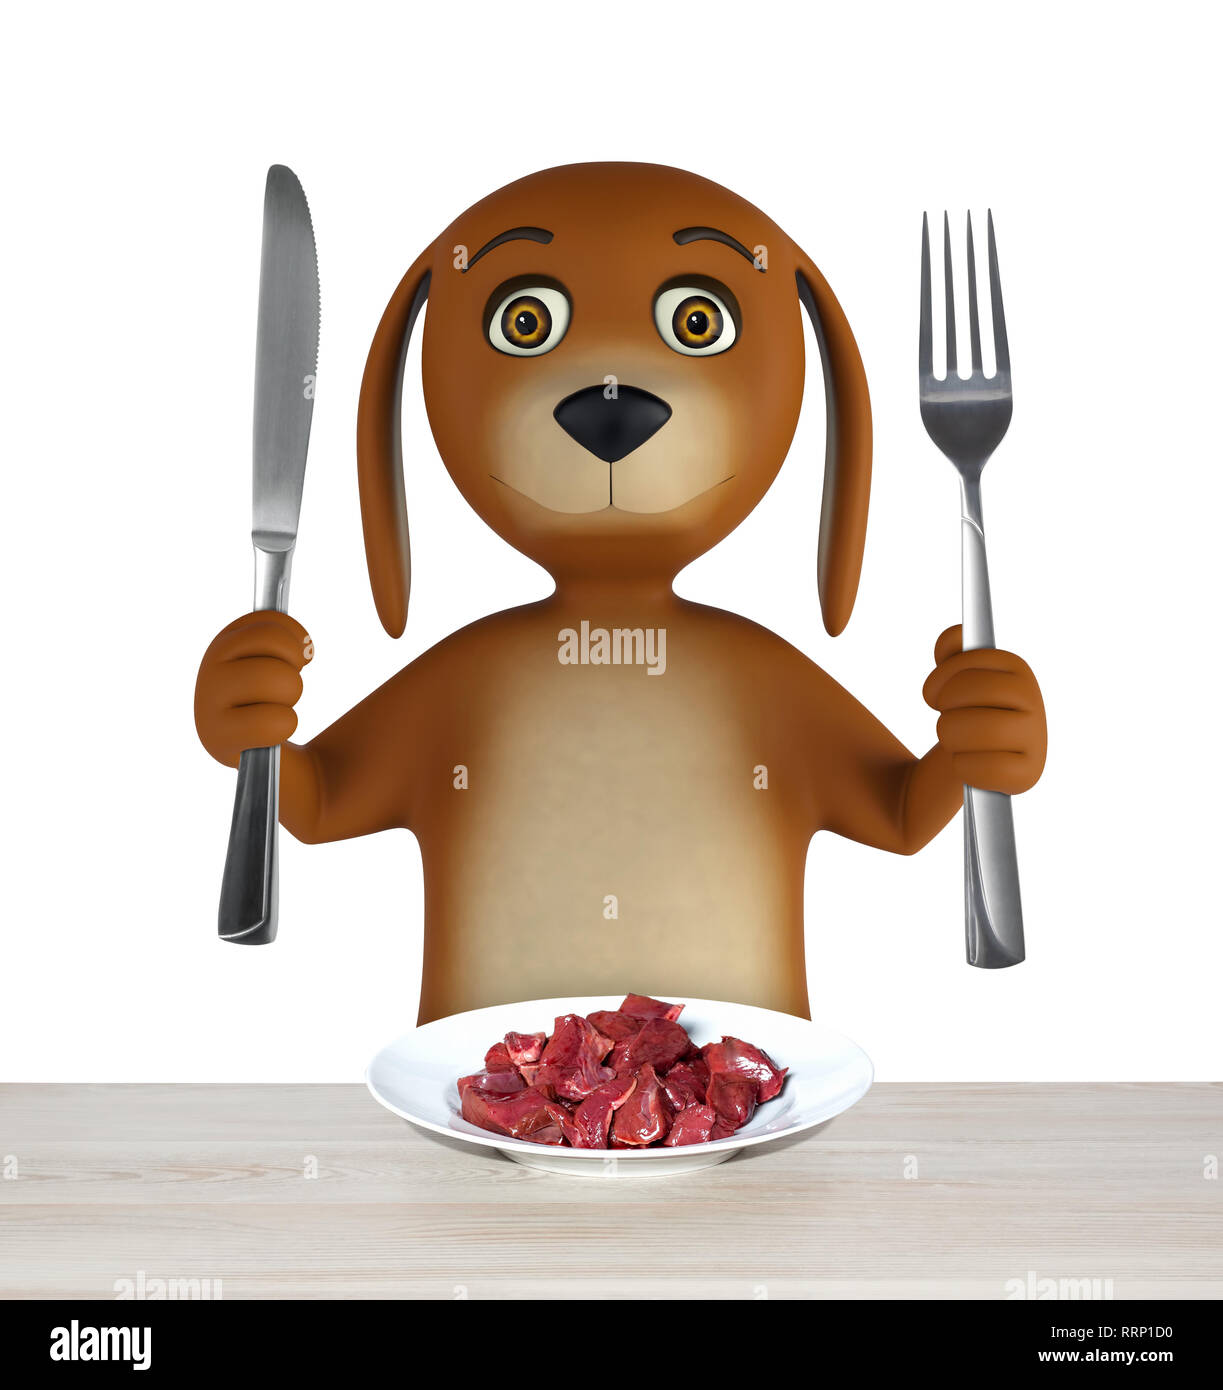 Cartoon dog with bowl of meat holds a knife and fork. isolated on white background. 3d render Stock Photo